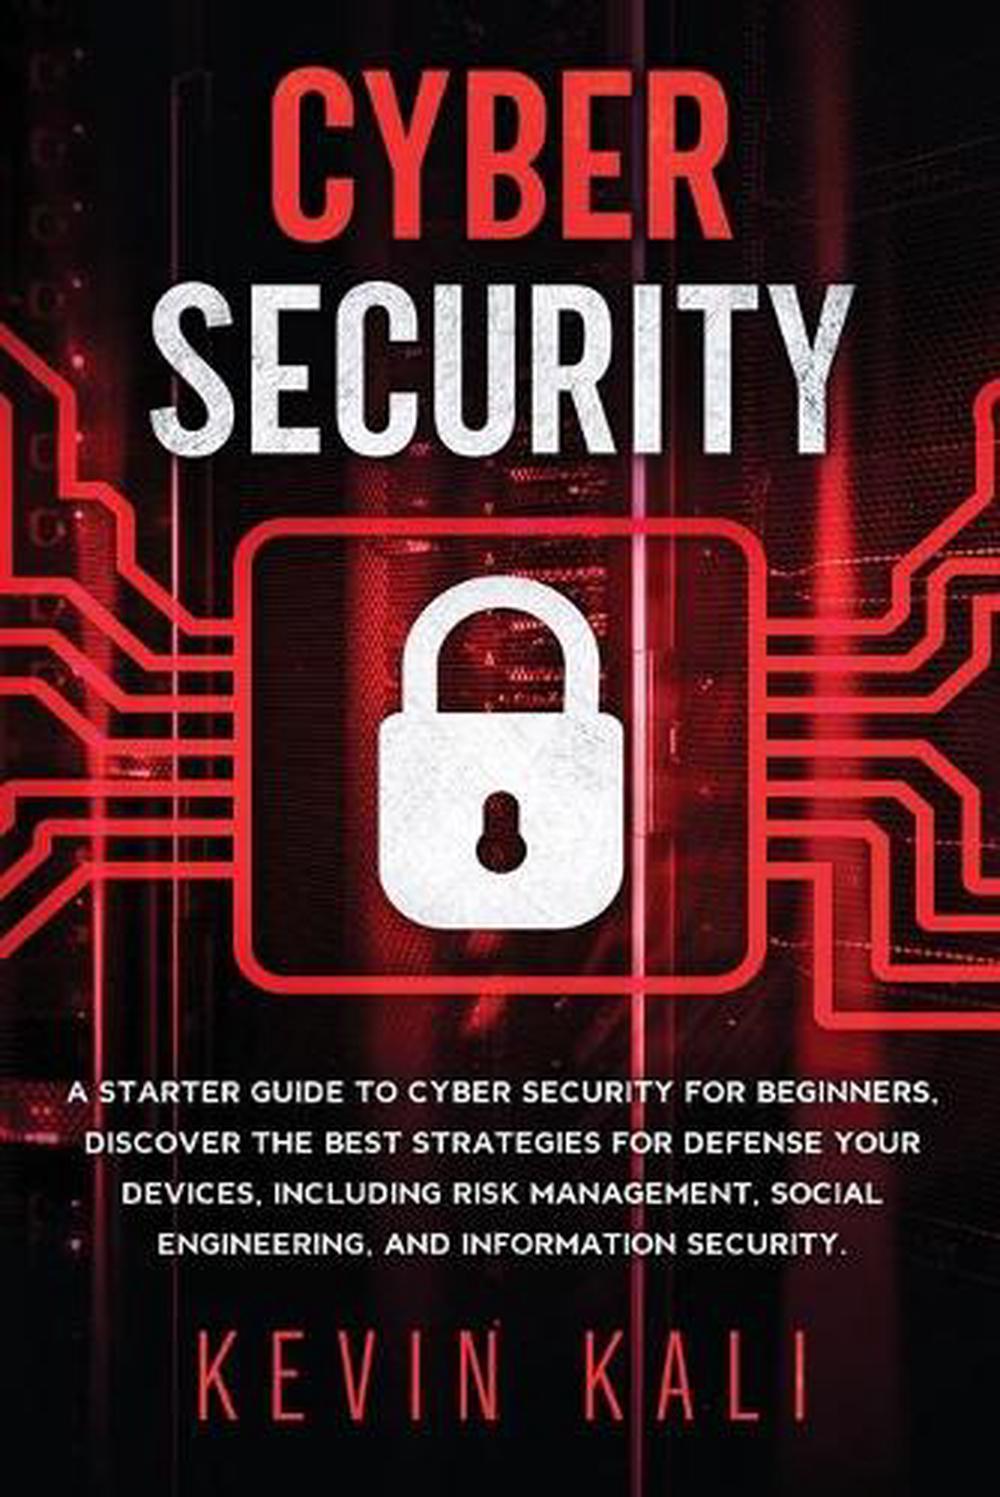 Cyber Security by Kali Kevin Kali (English) Paperback Book Free